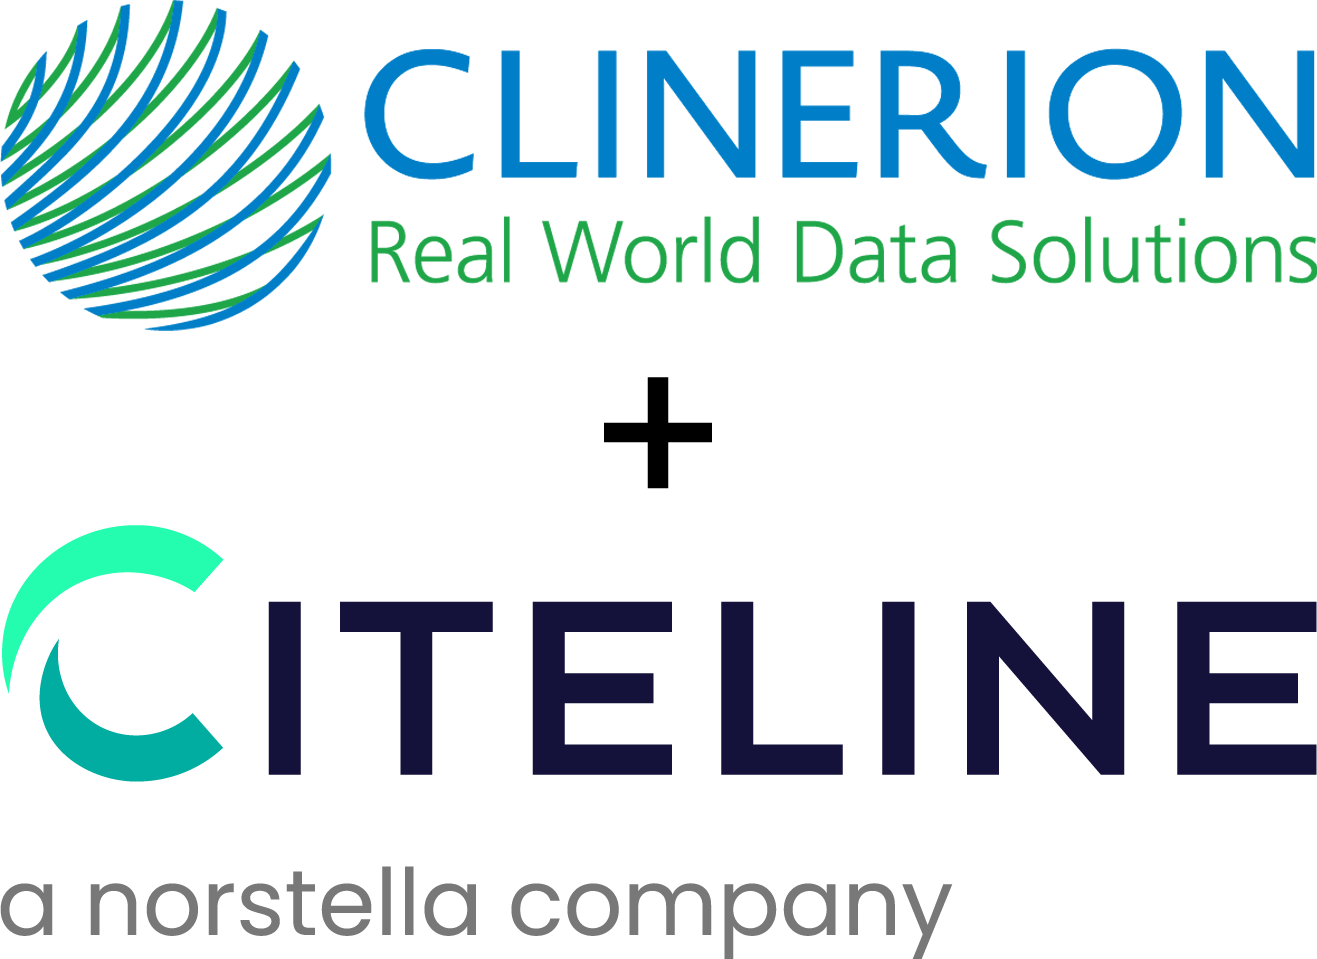 Clinerion is part of Citeline, a Norstella company!